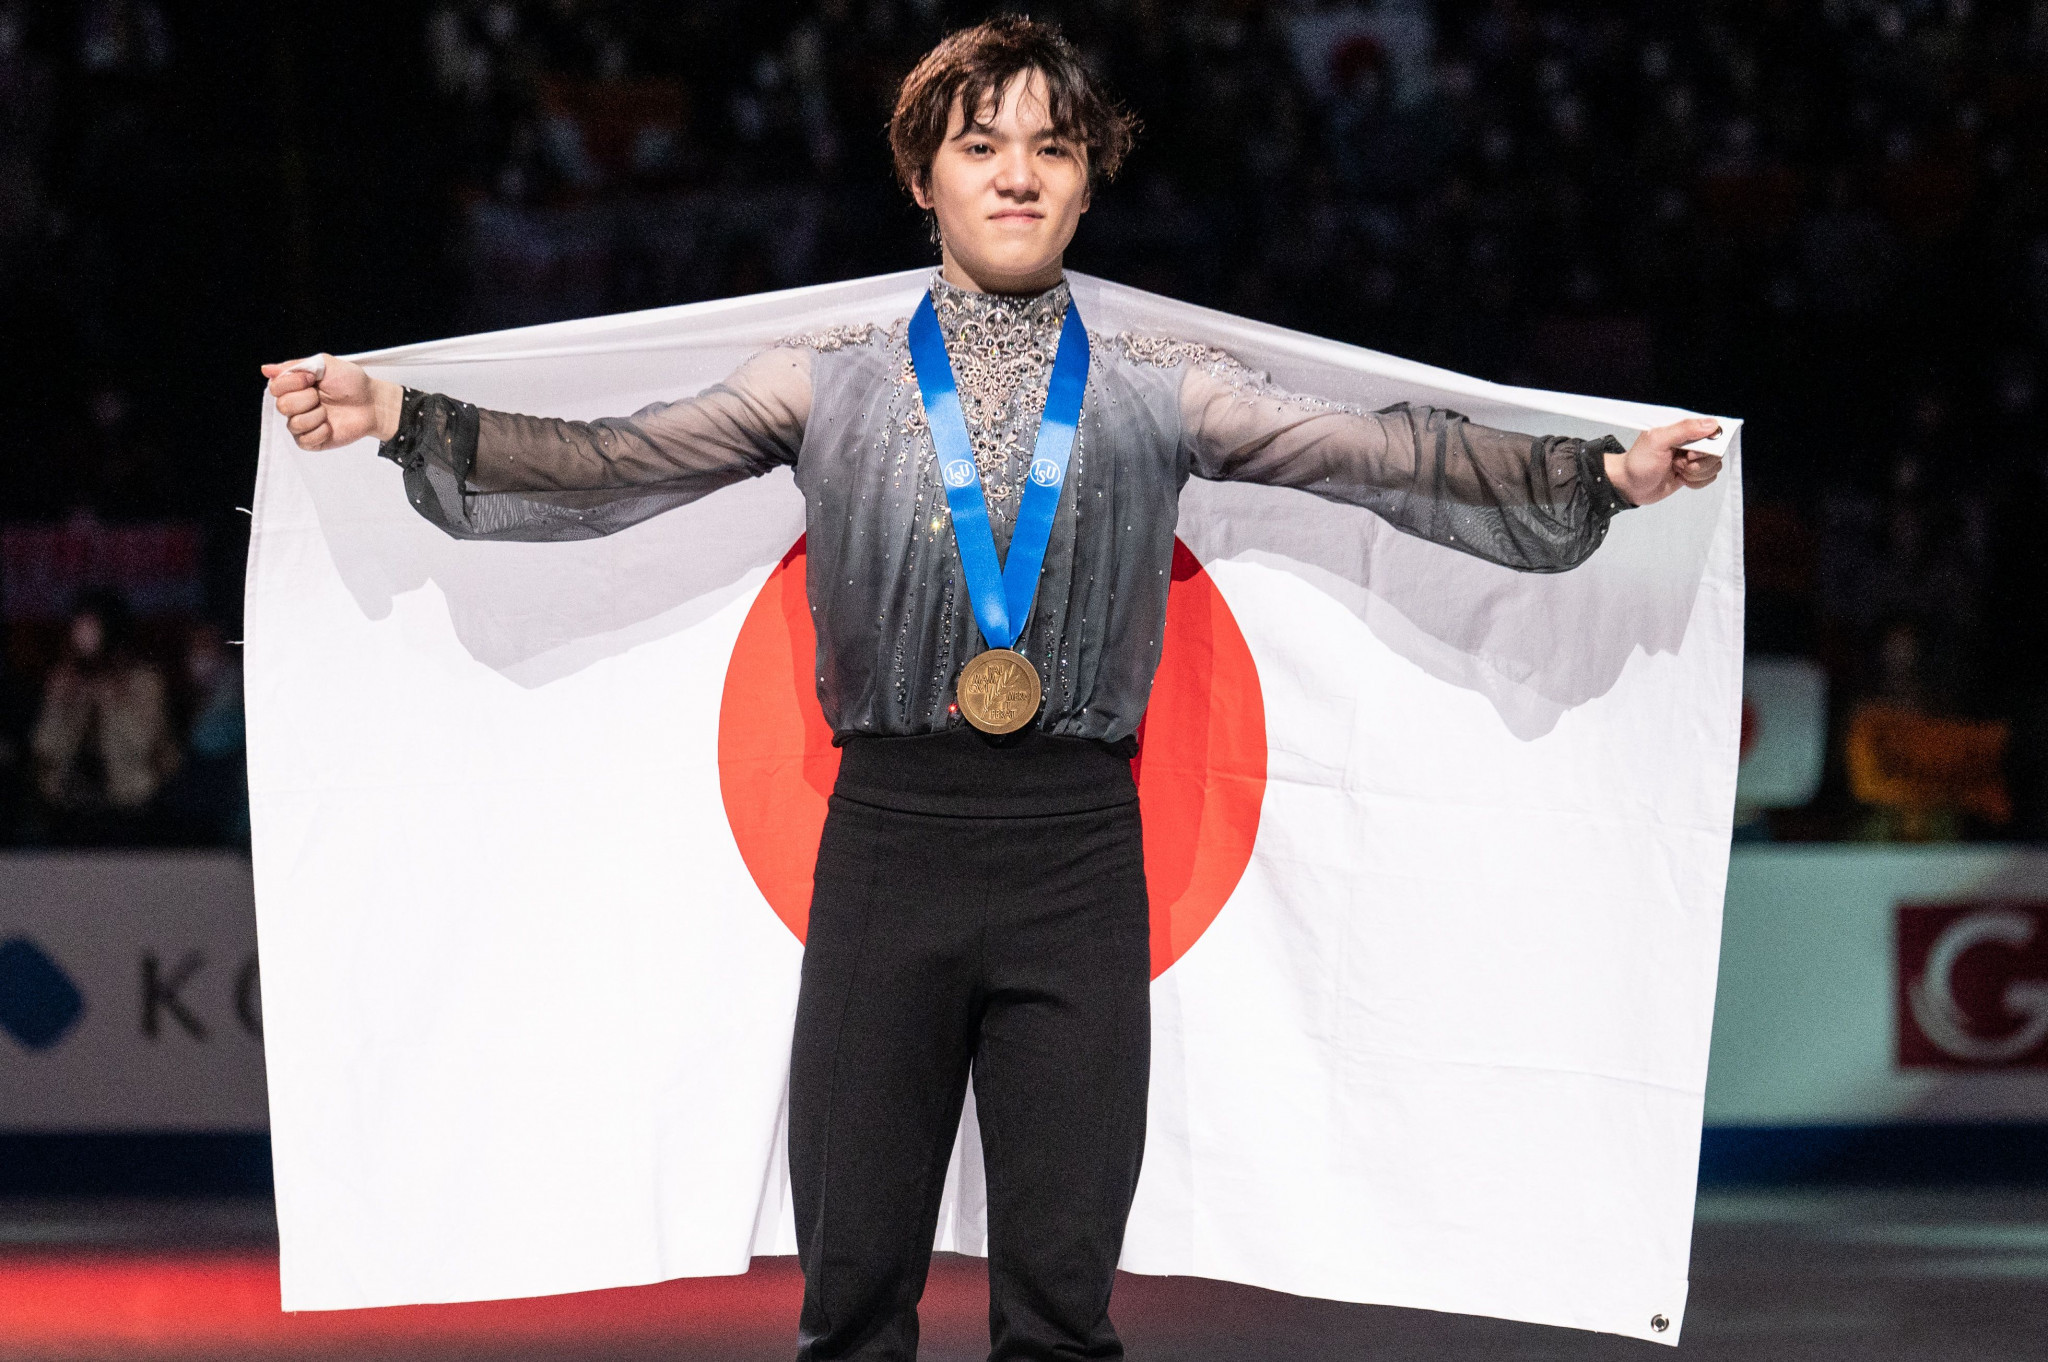 Japan's Shoma Uno made it back-to-back men's singles titles at the ISU World Figure Skating Championships in Saitama ©Getty Images